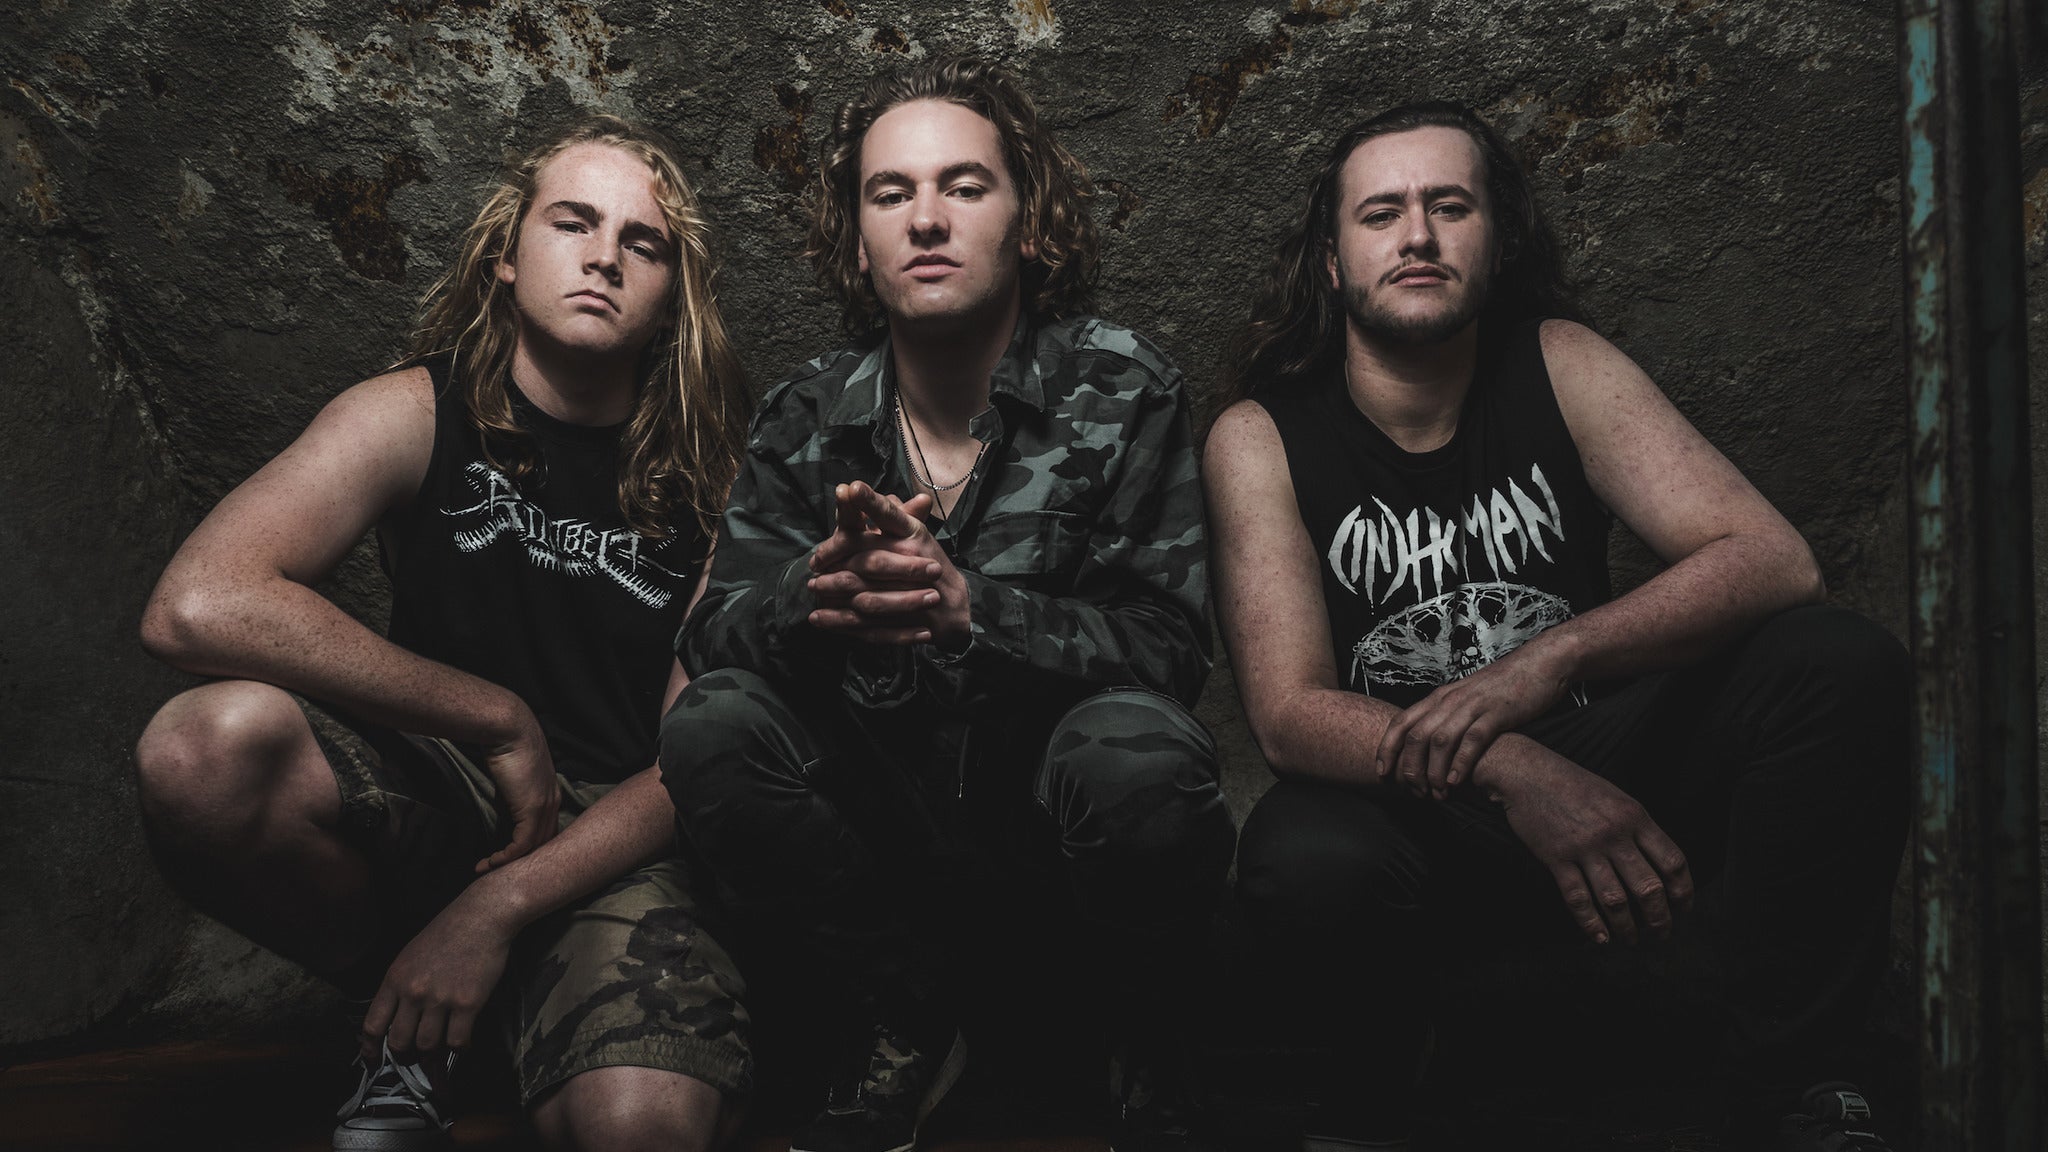 Alien Weaponry Tangaroa North American Tour in Denver promo photo for Live Nation presale offer code